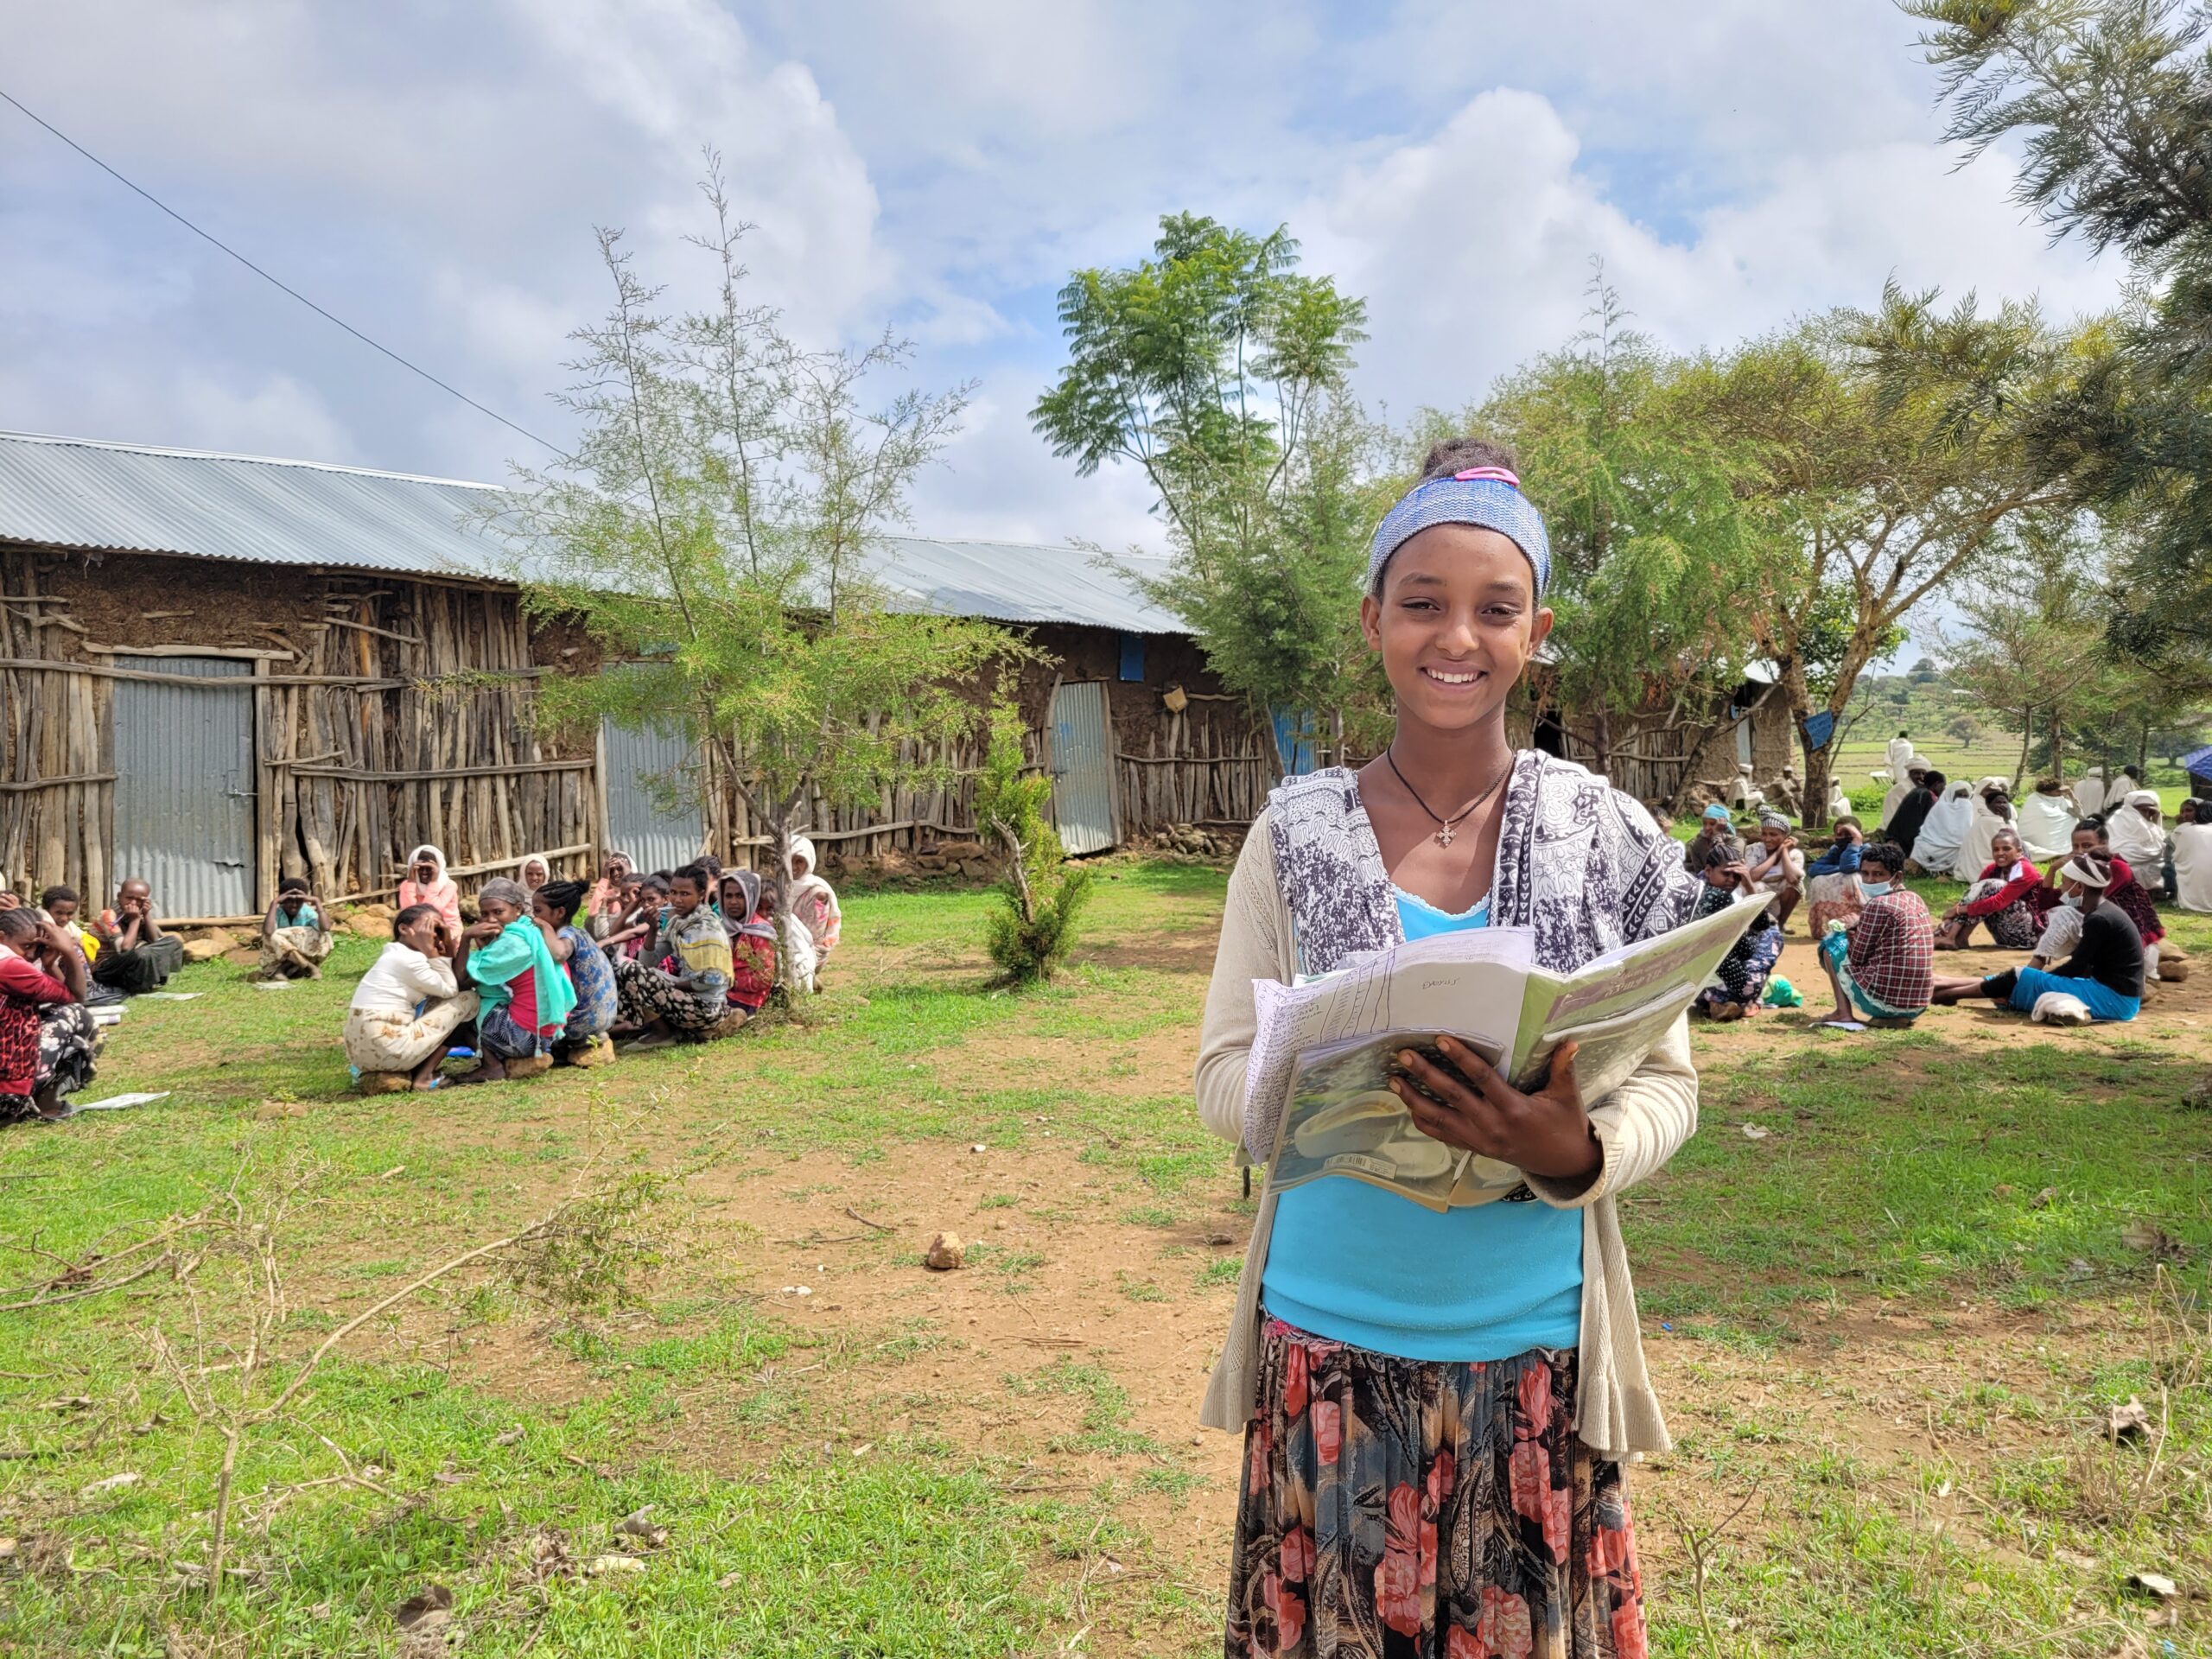 A girls smiles brightly while she stands outdoors holding an open book. Behind her a group of girls site in a circle.